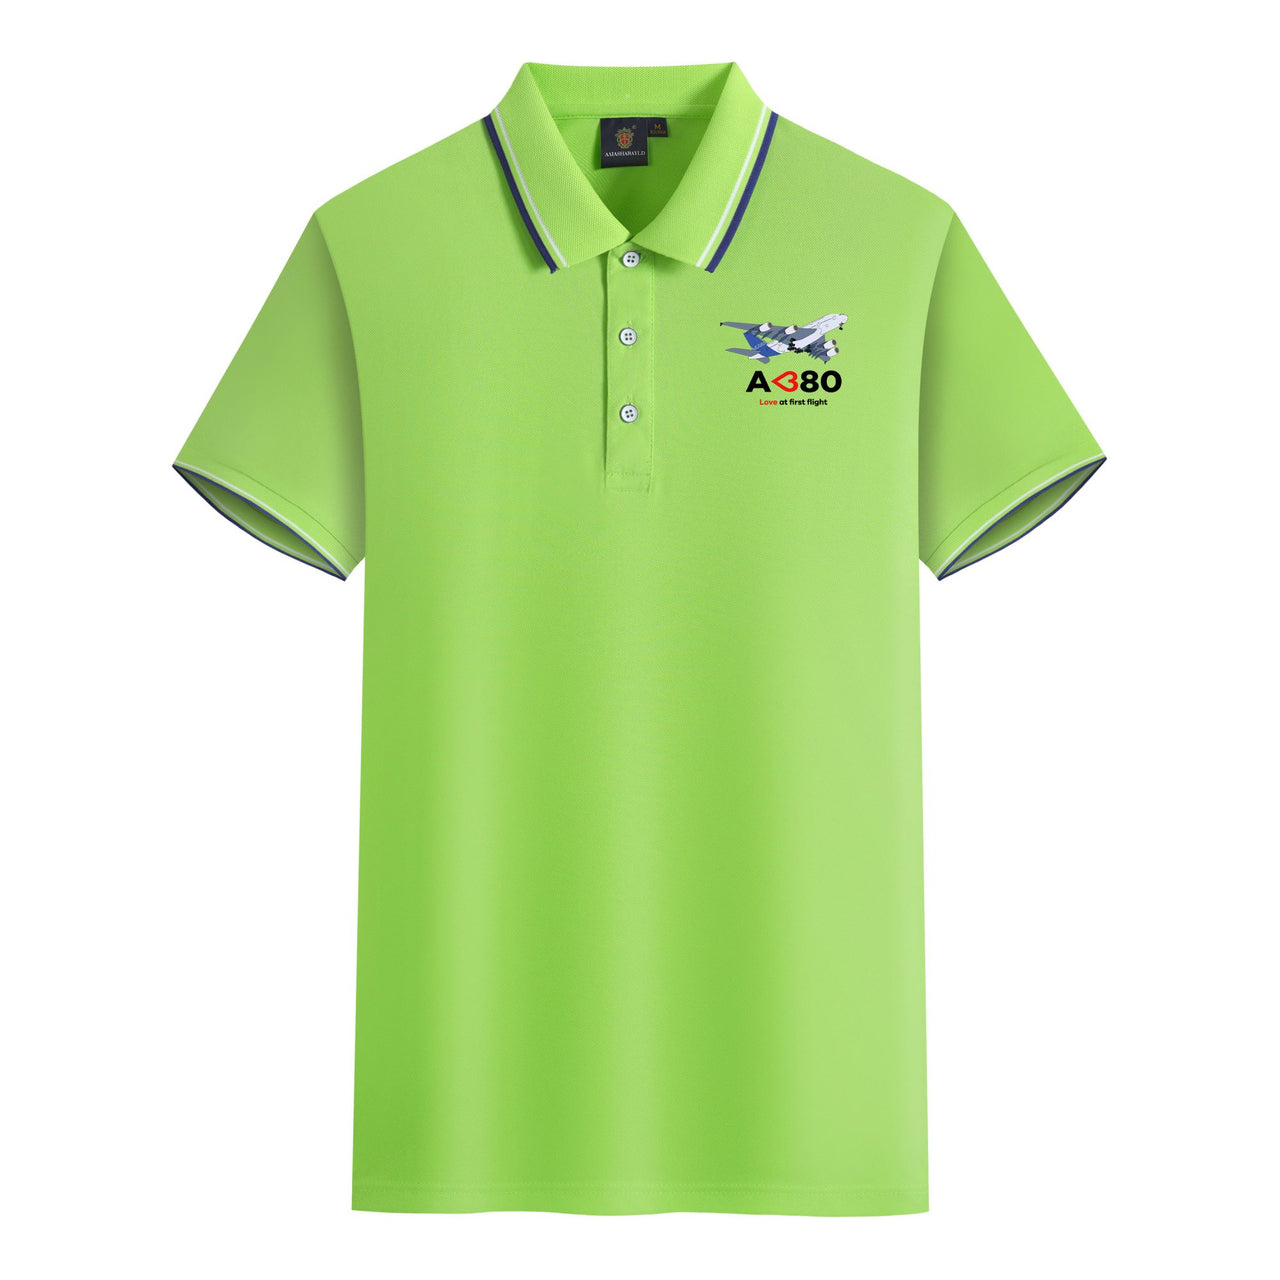 Airbus A380 Love at first flight Designed Stylish Polo T-Shirts